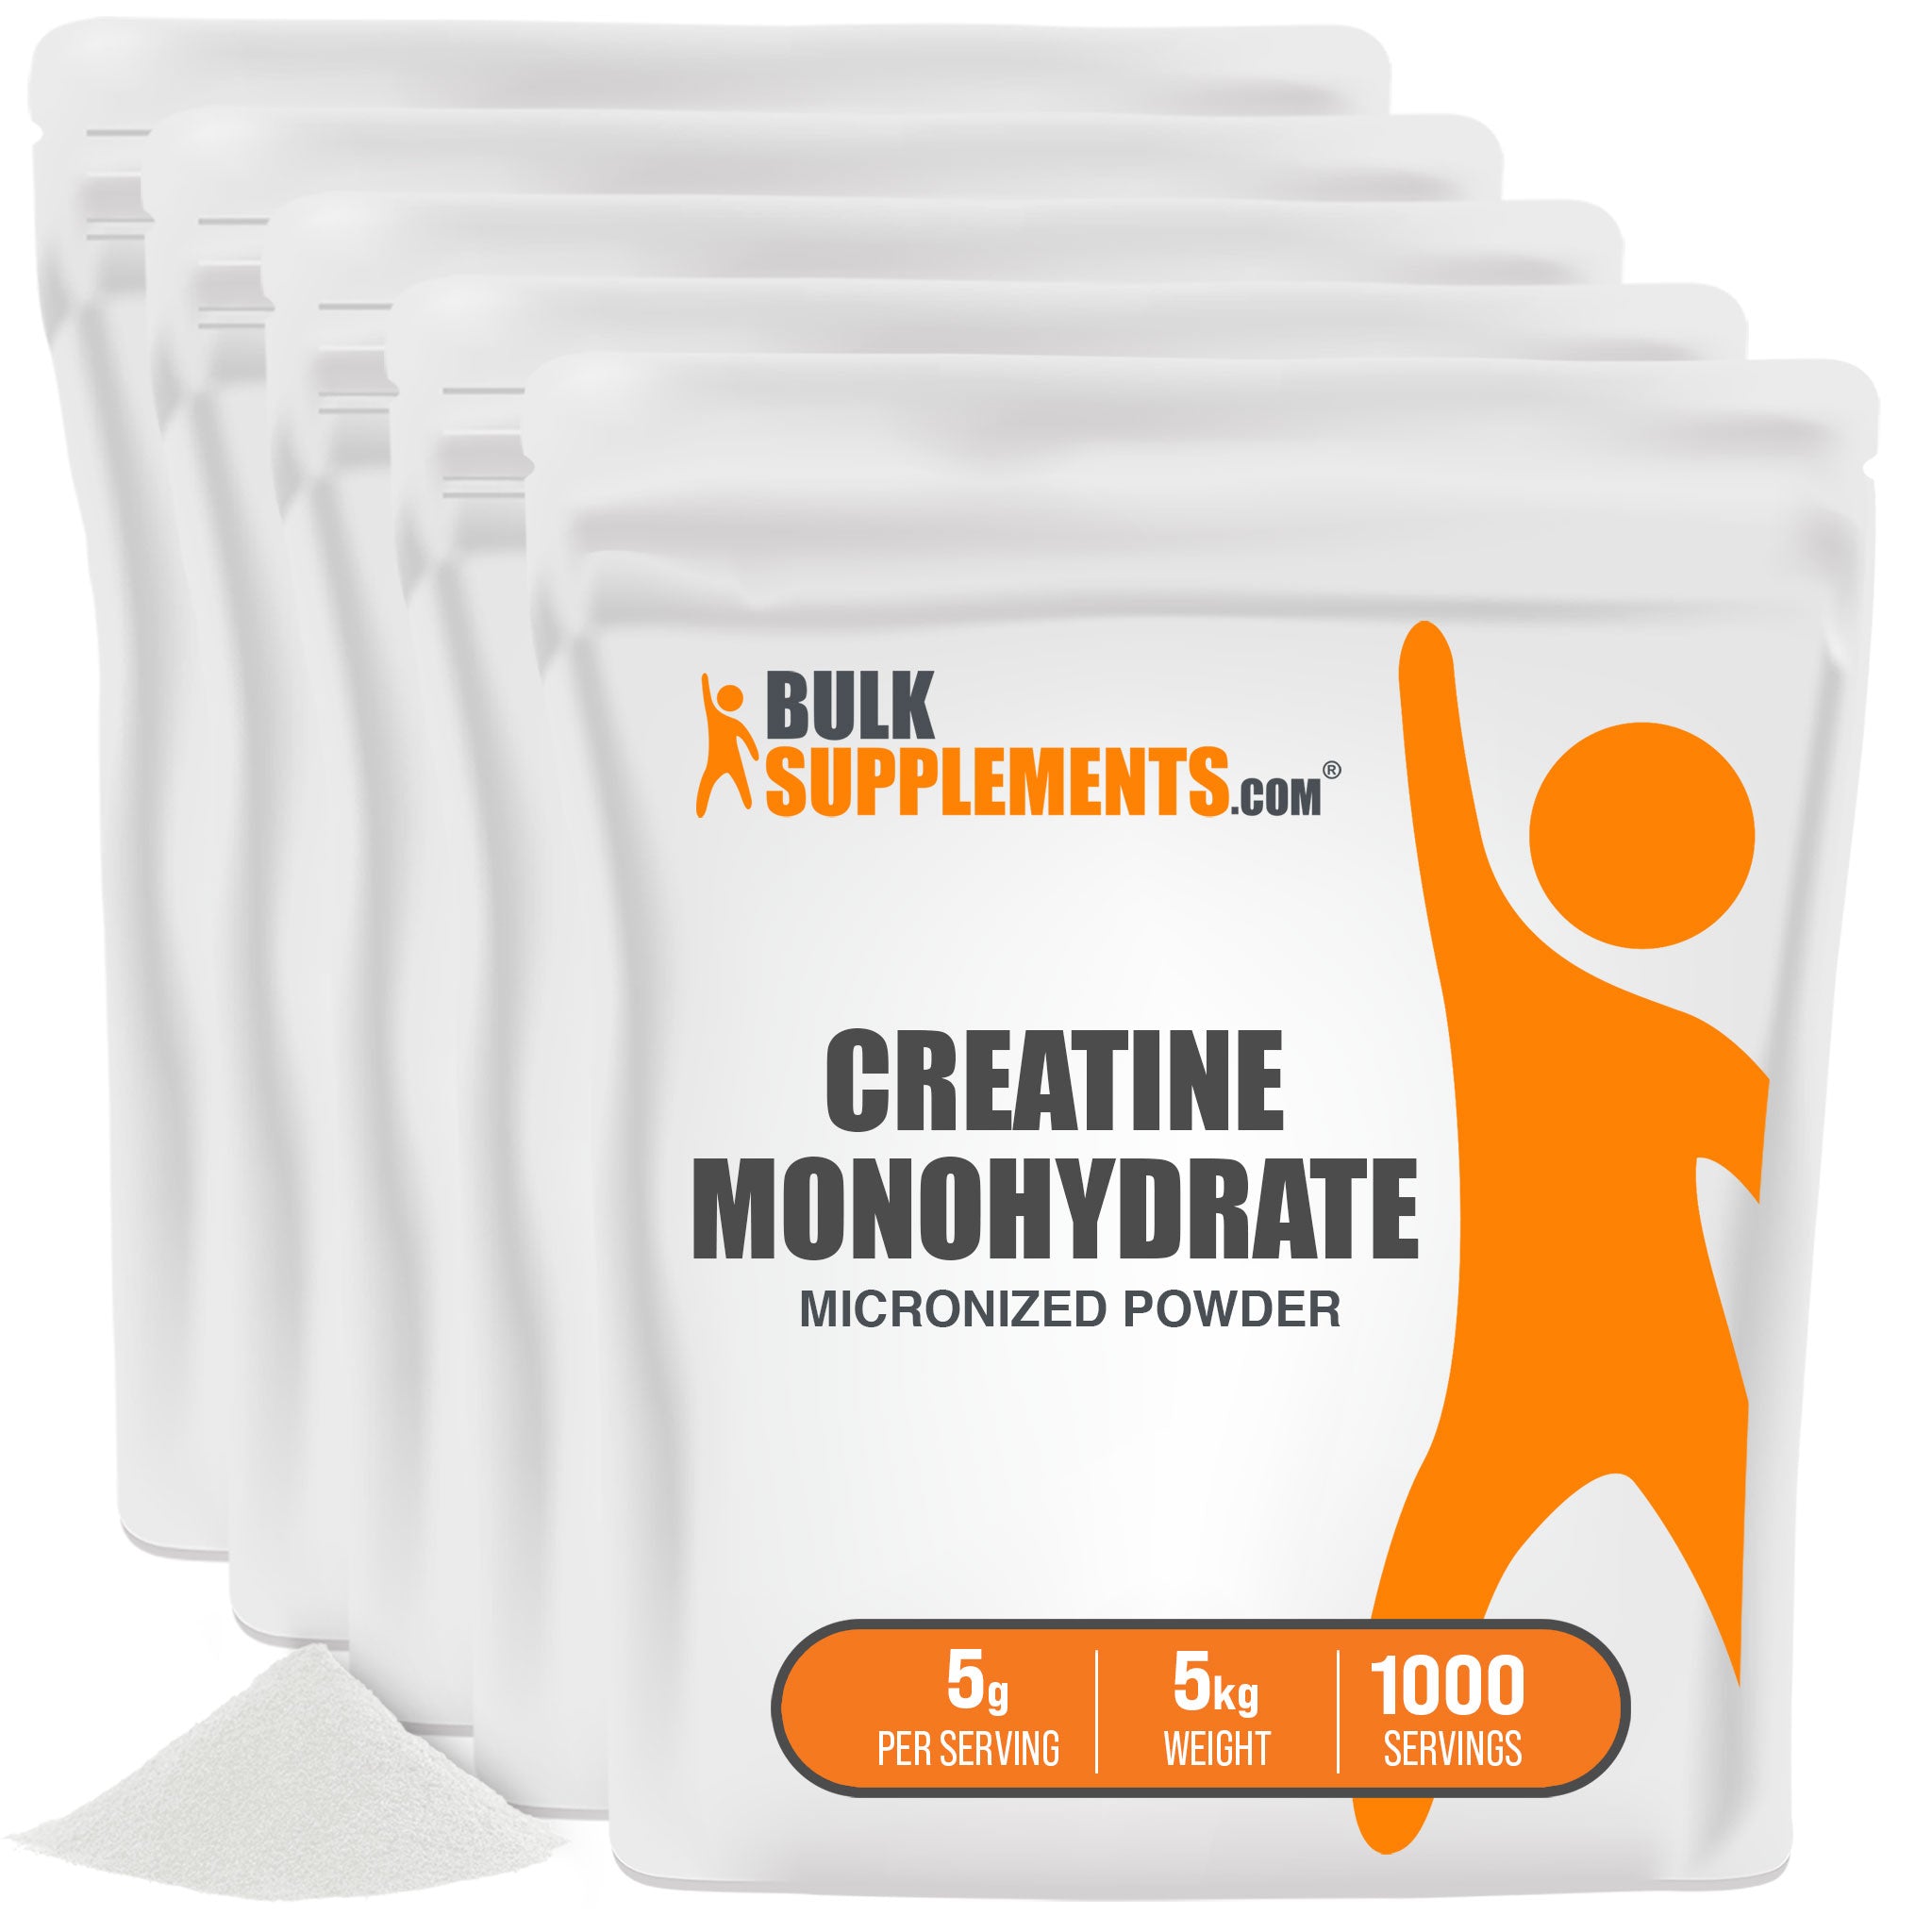 Creatine Monohydrate Bulk Pack of five 1kg bags with a total of 1000 servings